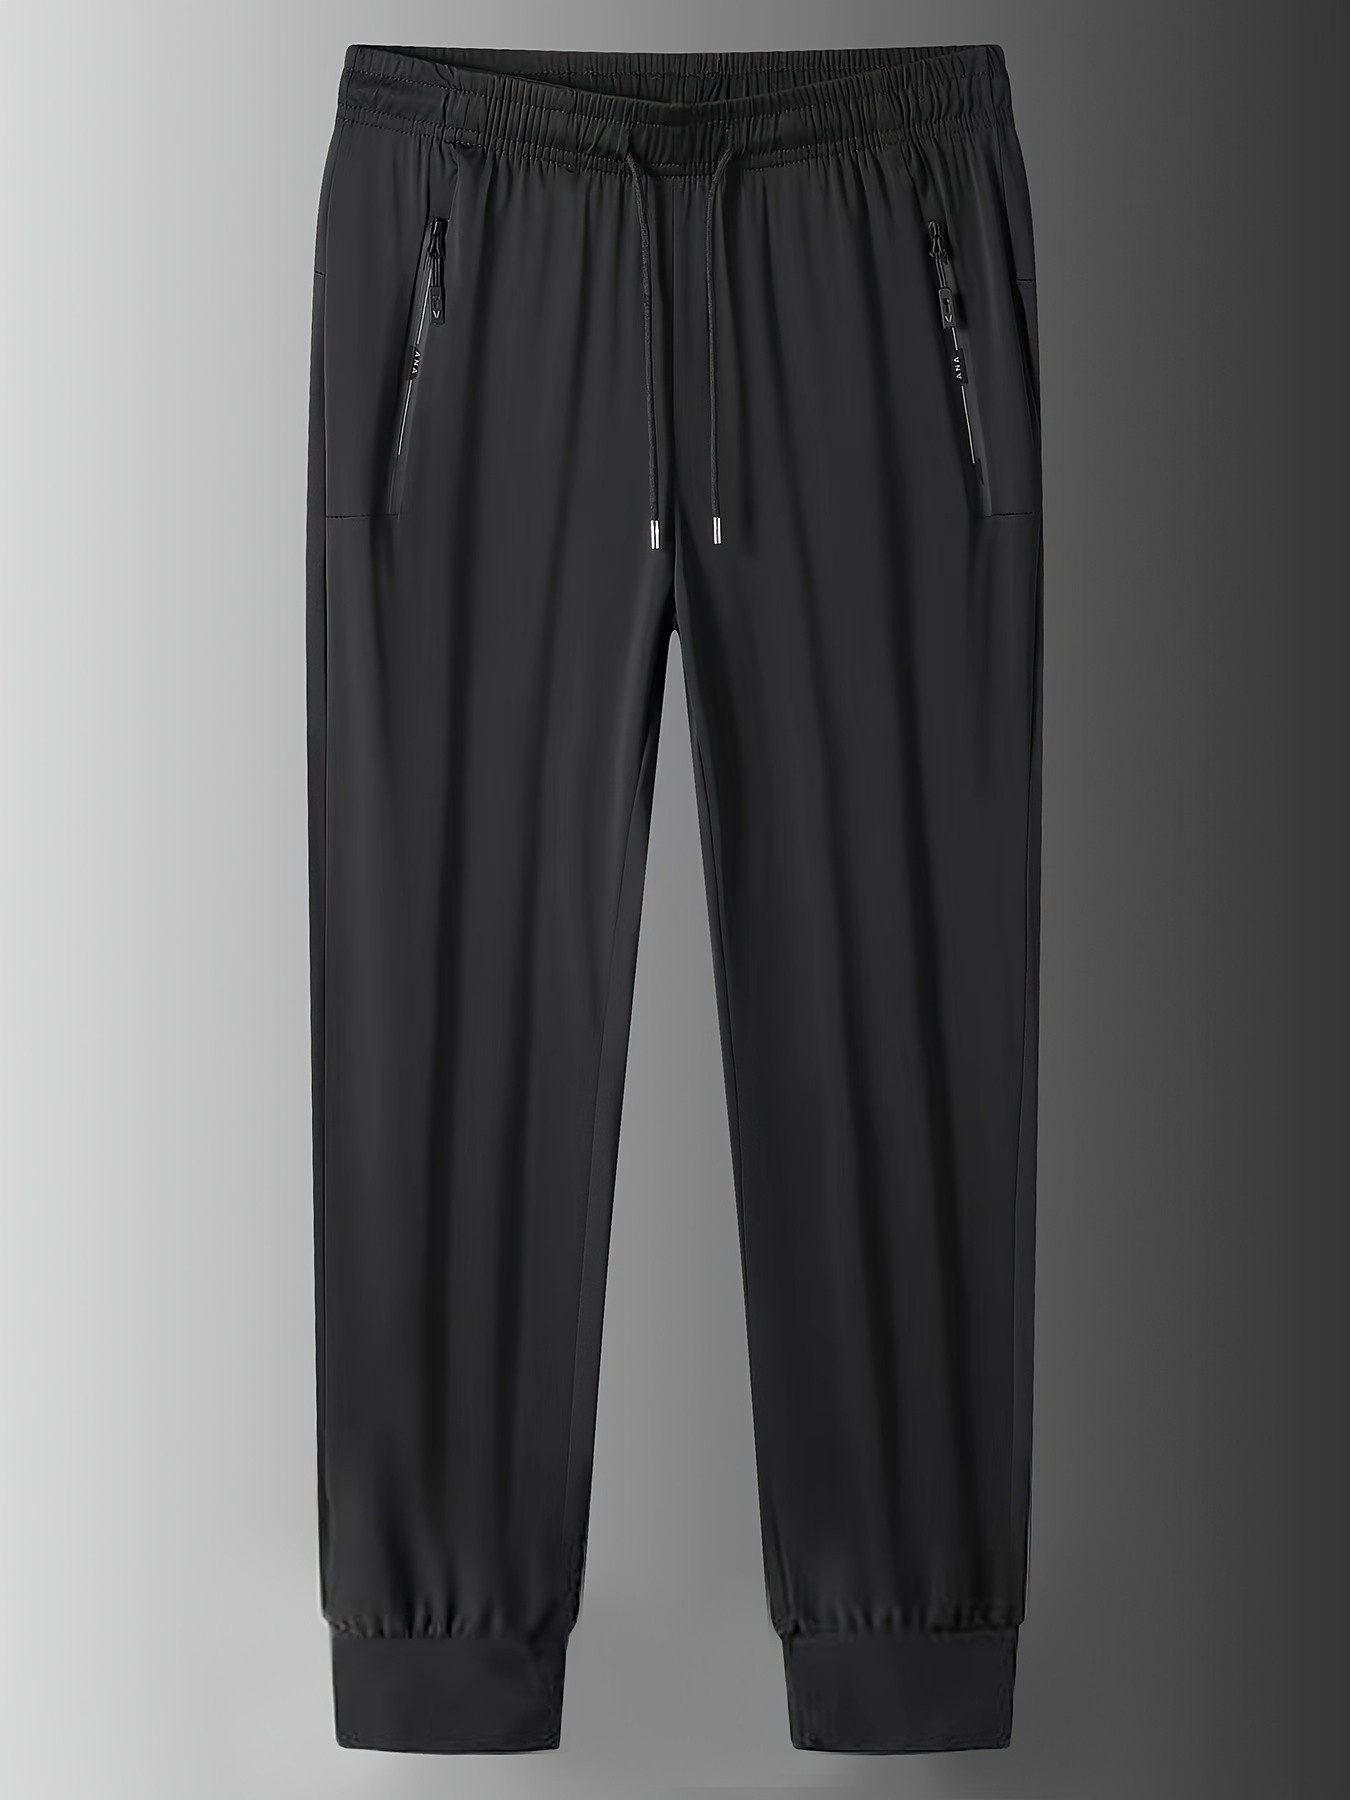 Breathable Simple Stretchy Ice Silk Trousers Bottoms Long Pants